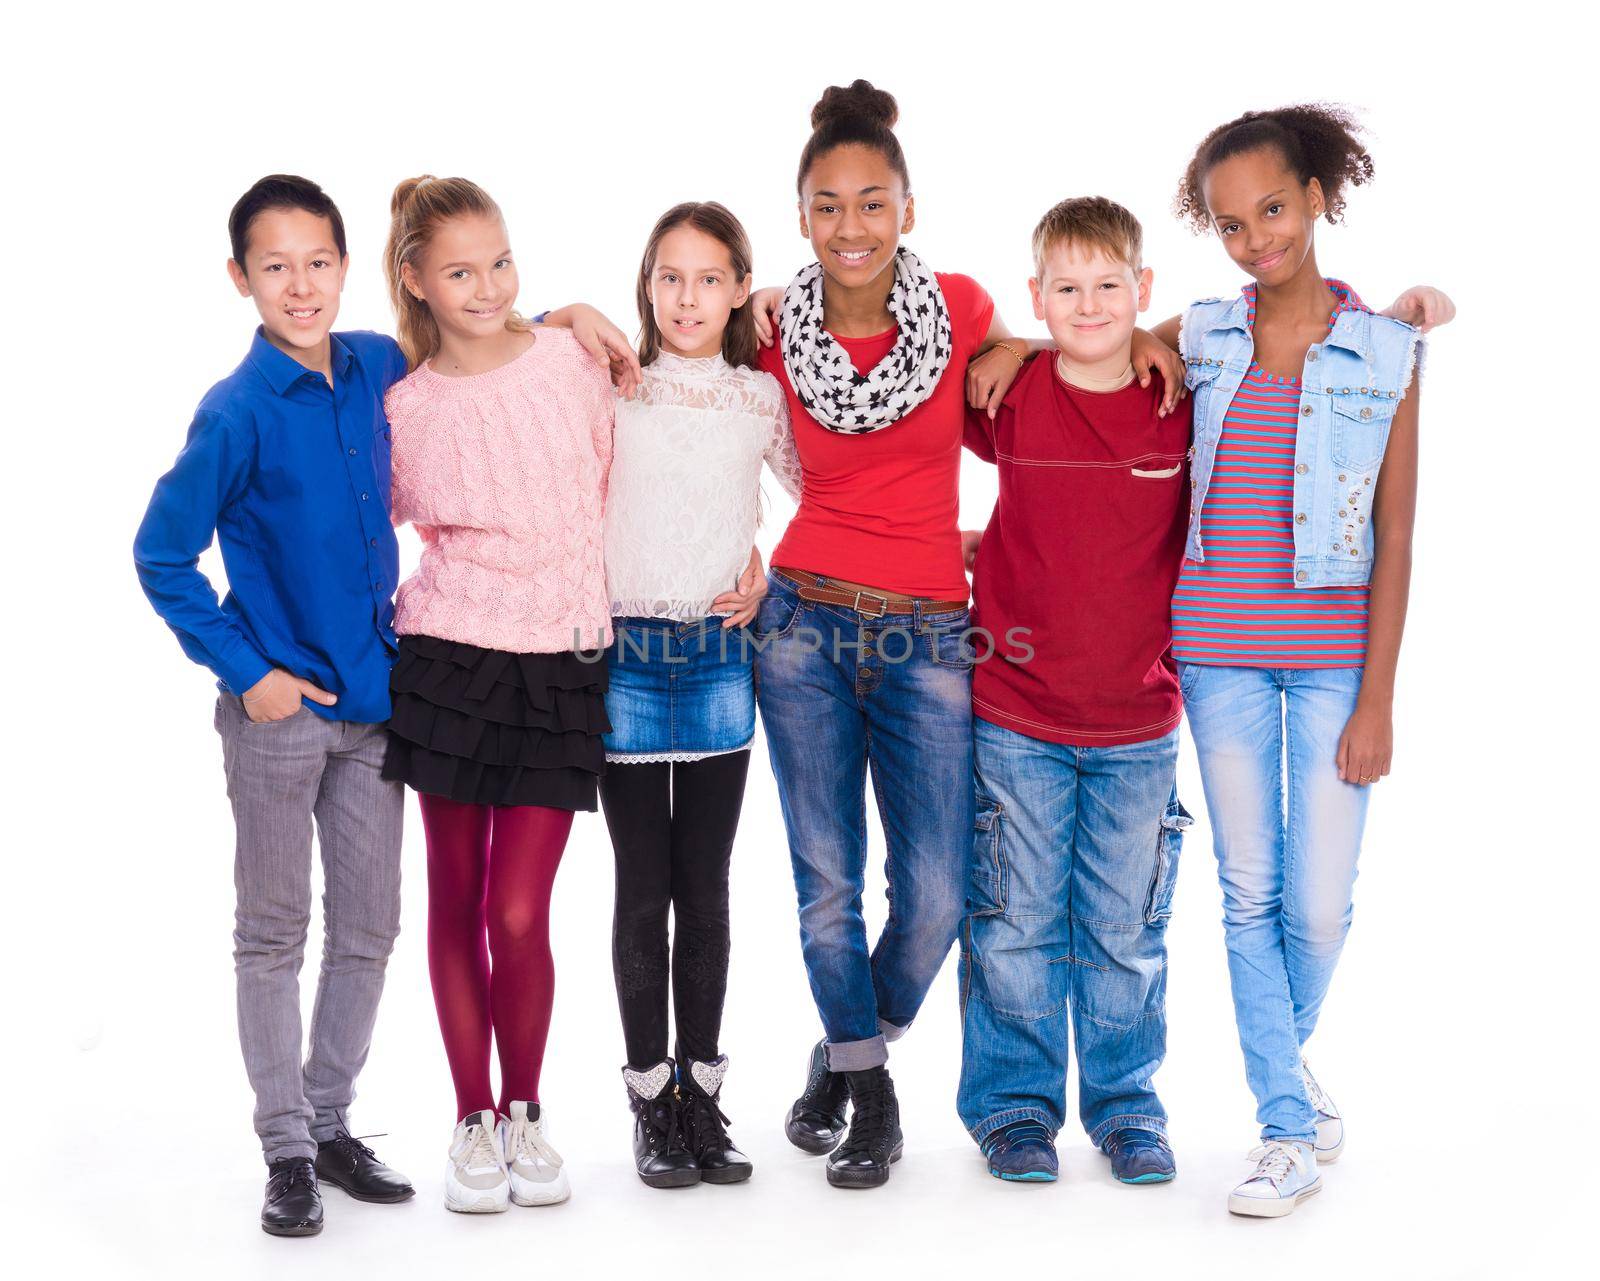 kids with different clothes standing together isolated on white background